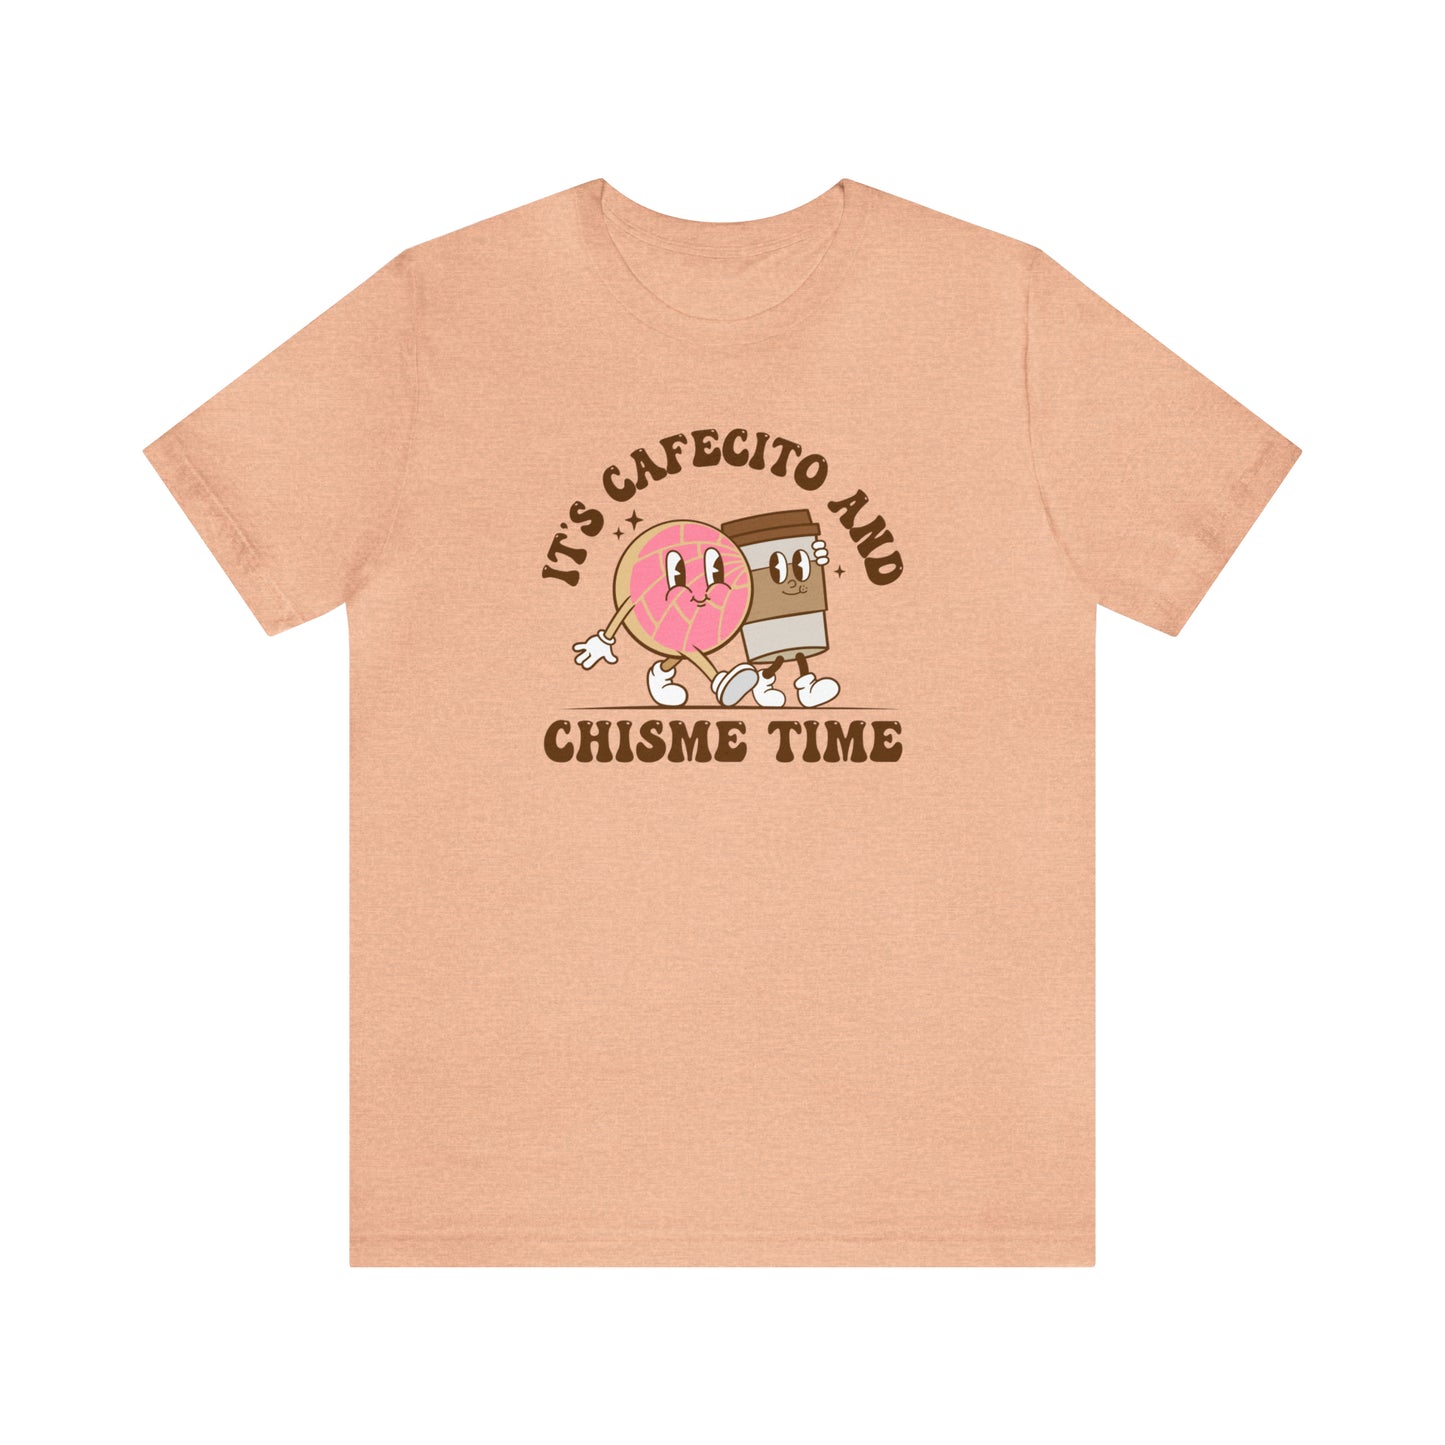 Cafecito y chisme time tshirt for Latina friend, Mexican best friend or comadre. Christmas gift for Mexican chismosa amiga.